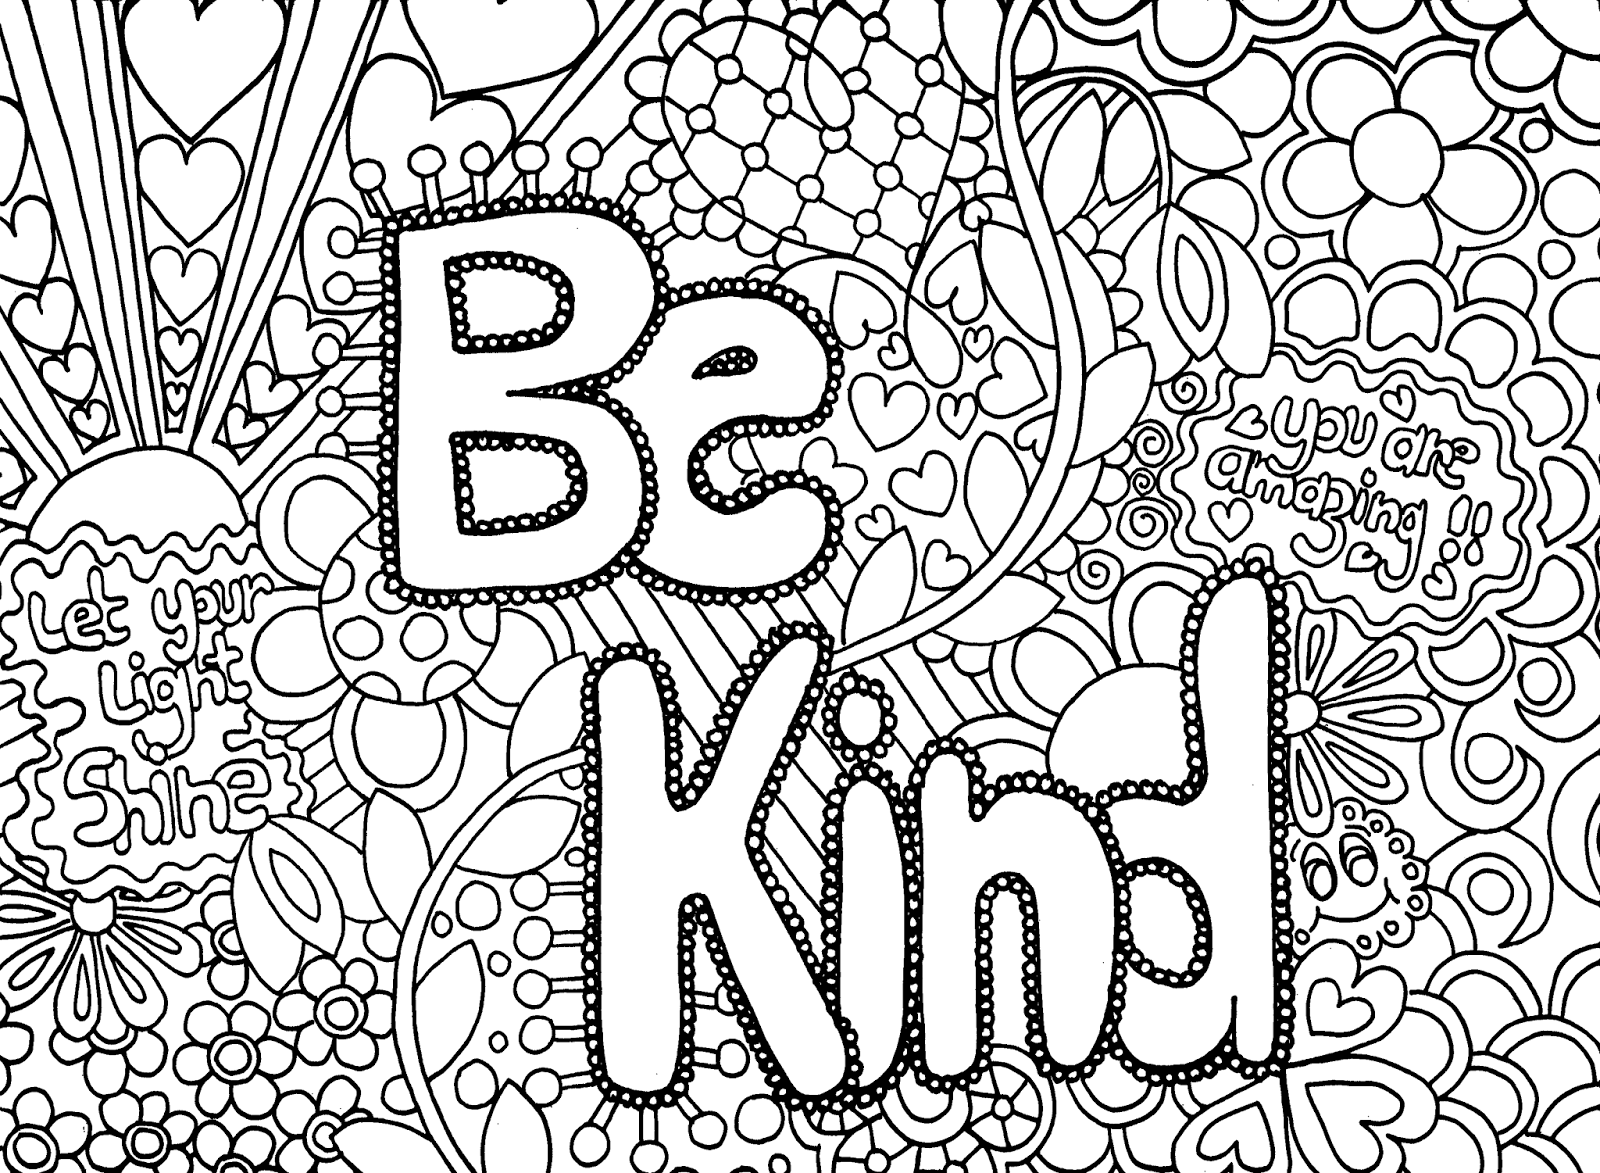 Coloring Sheet - Be Kind